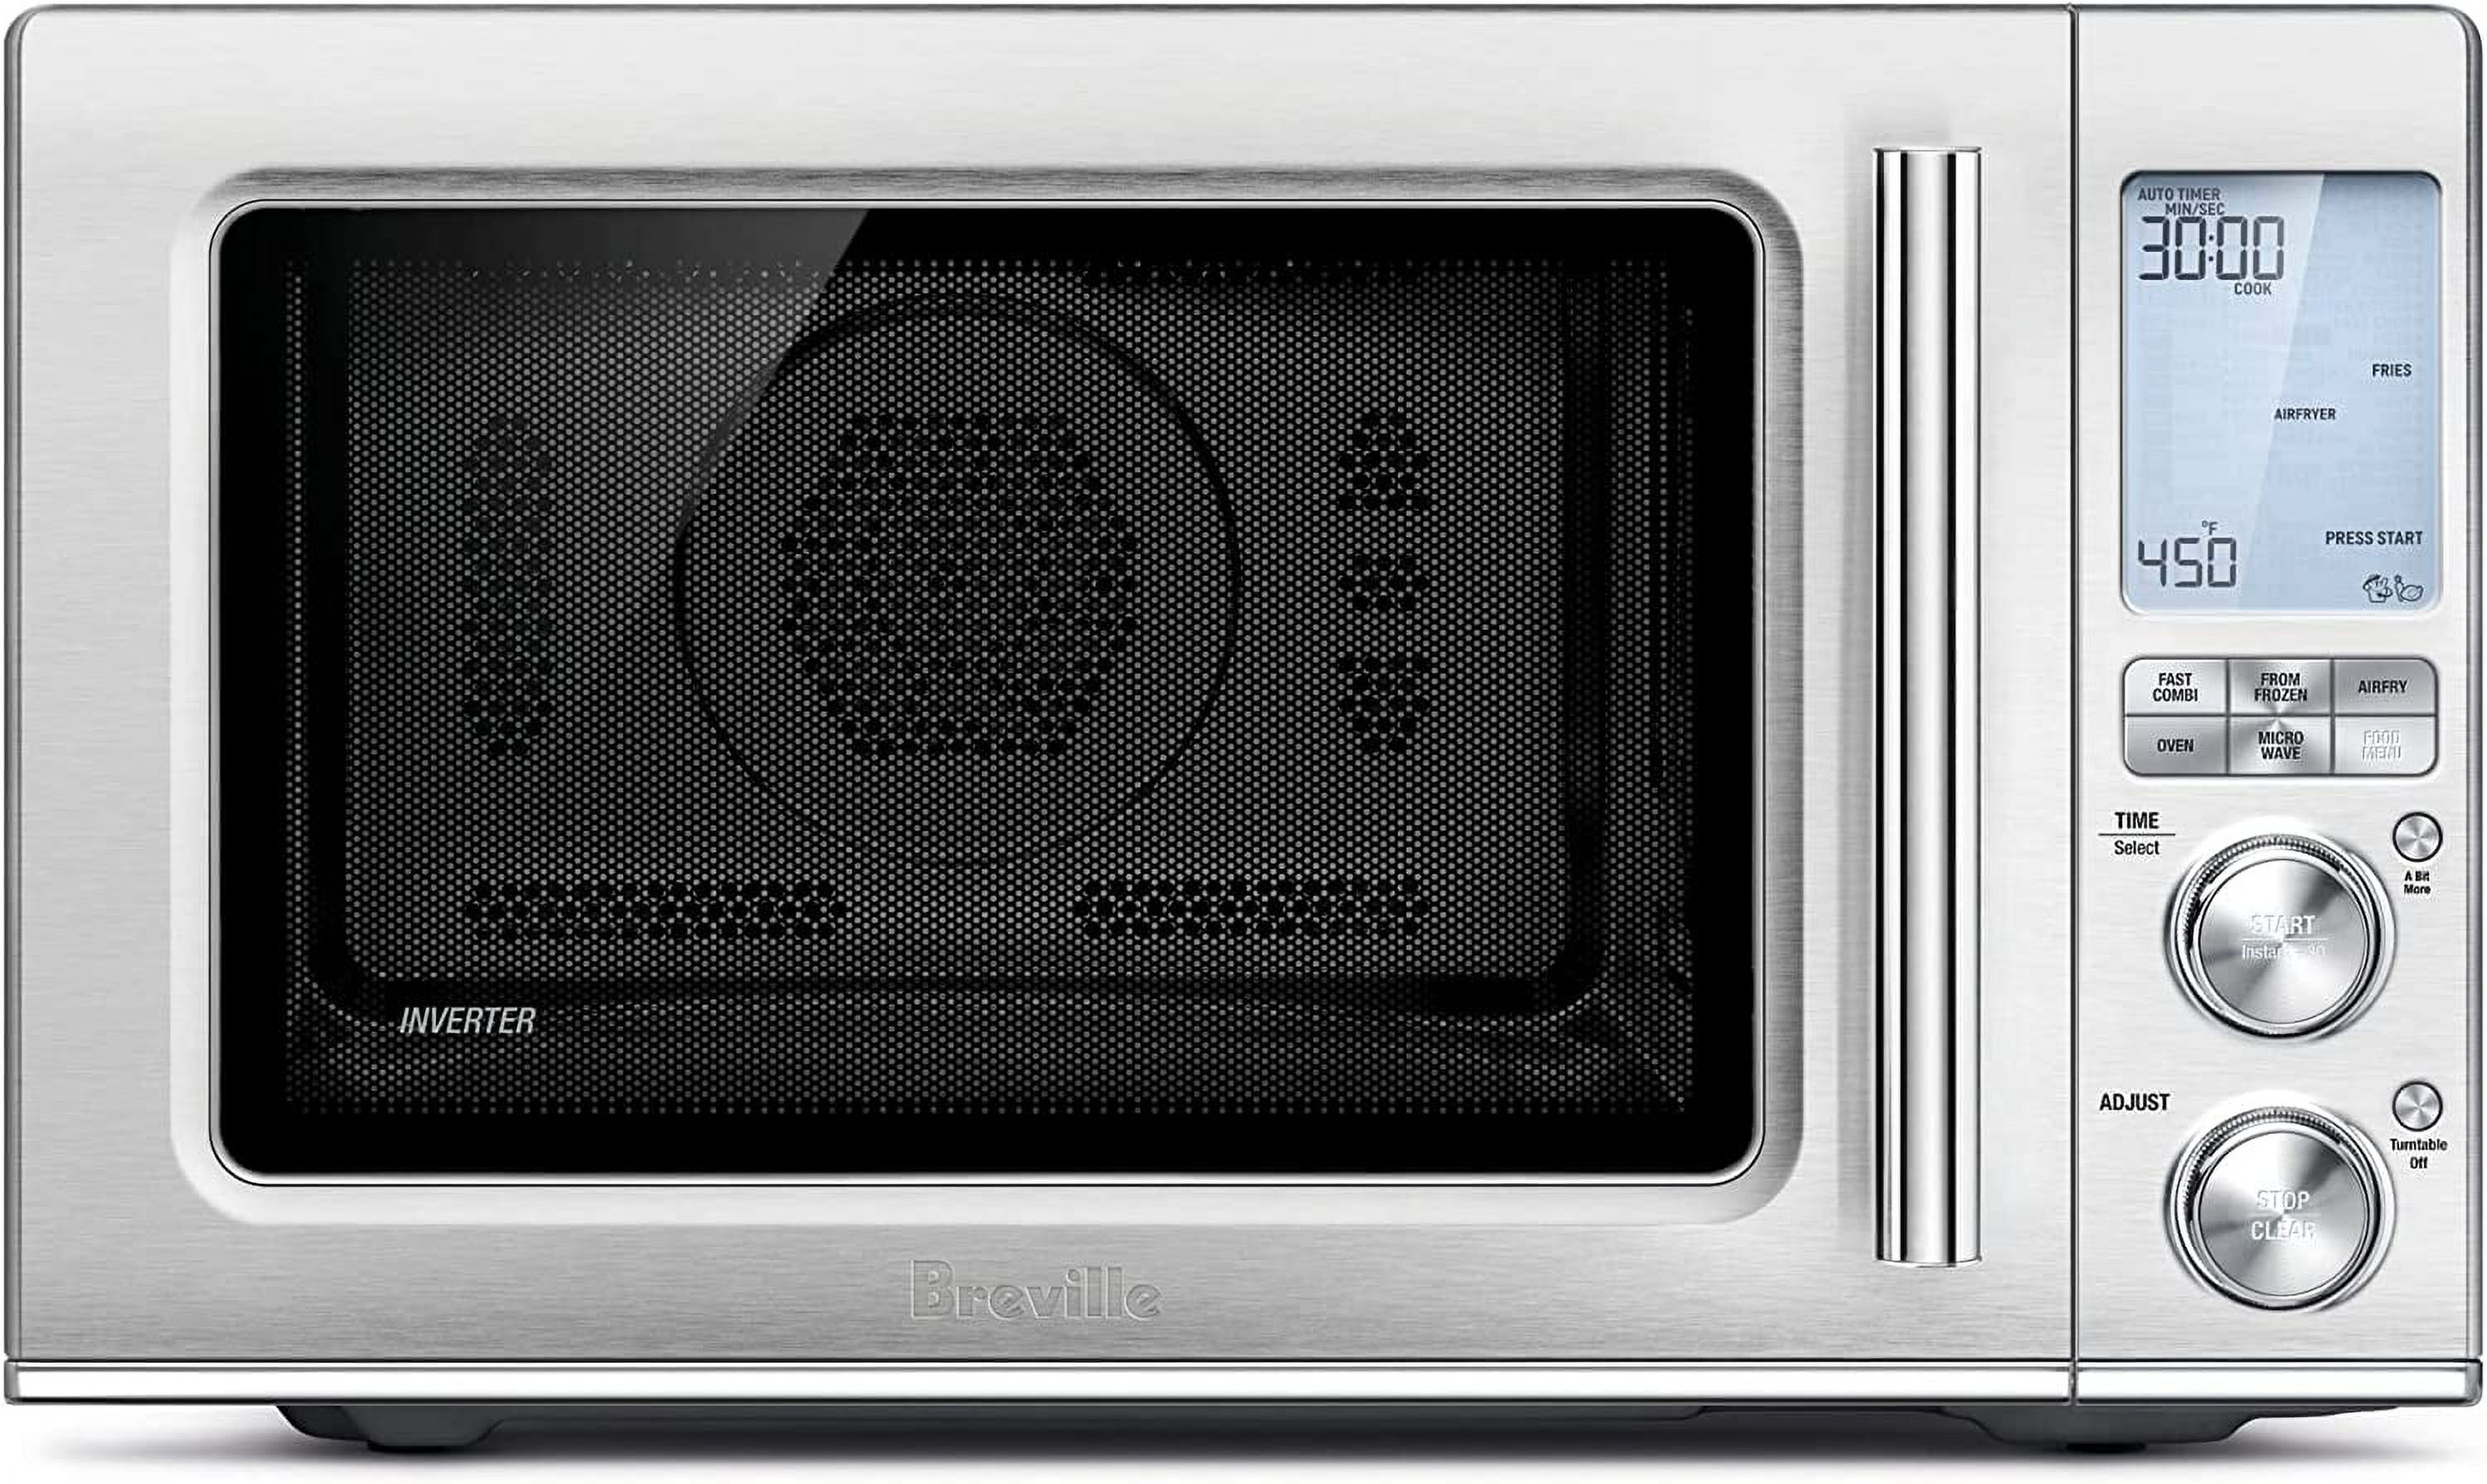 Breville Combi Wave 3-in-1 Microwave, Air Fryer, and Toaster Oven, Brushed Stainless Steel - image 1 of 4